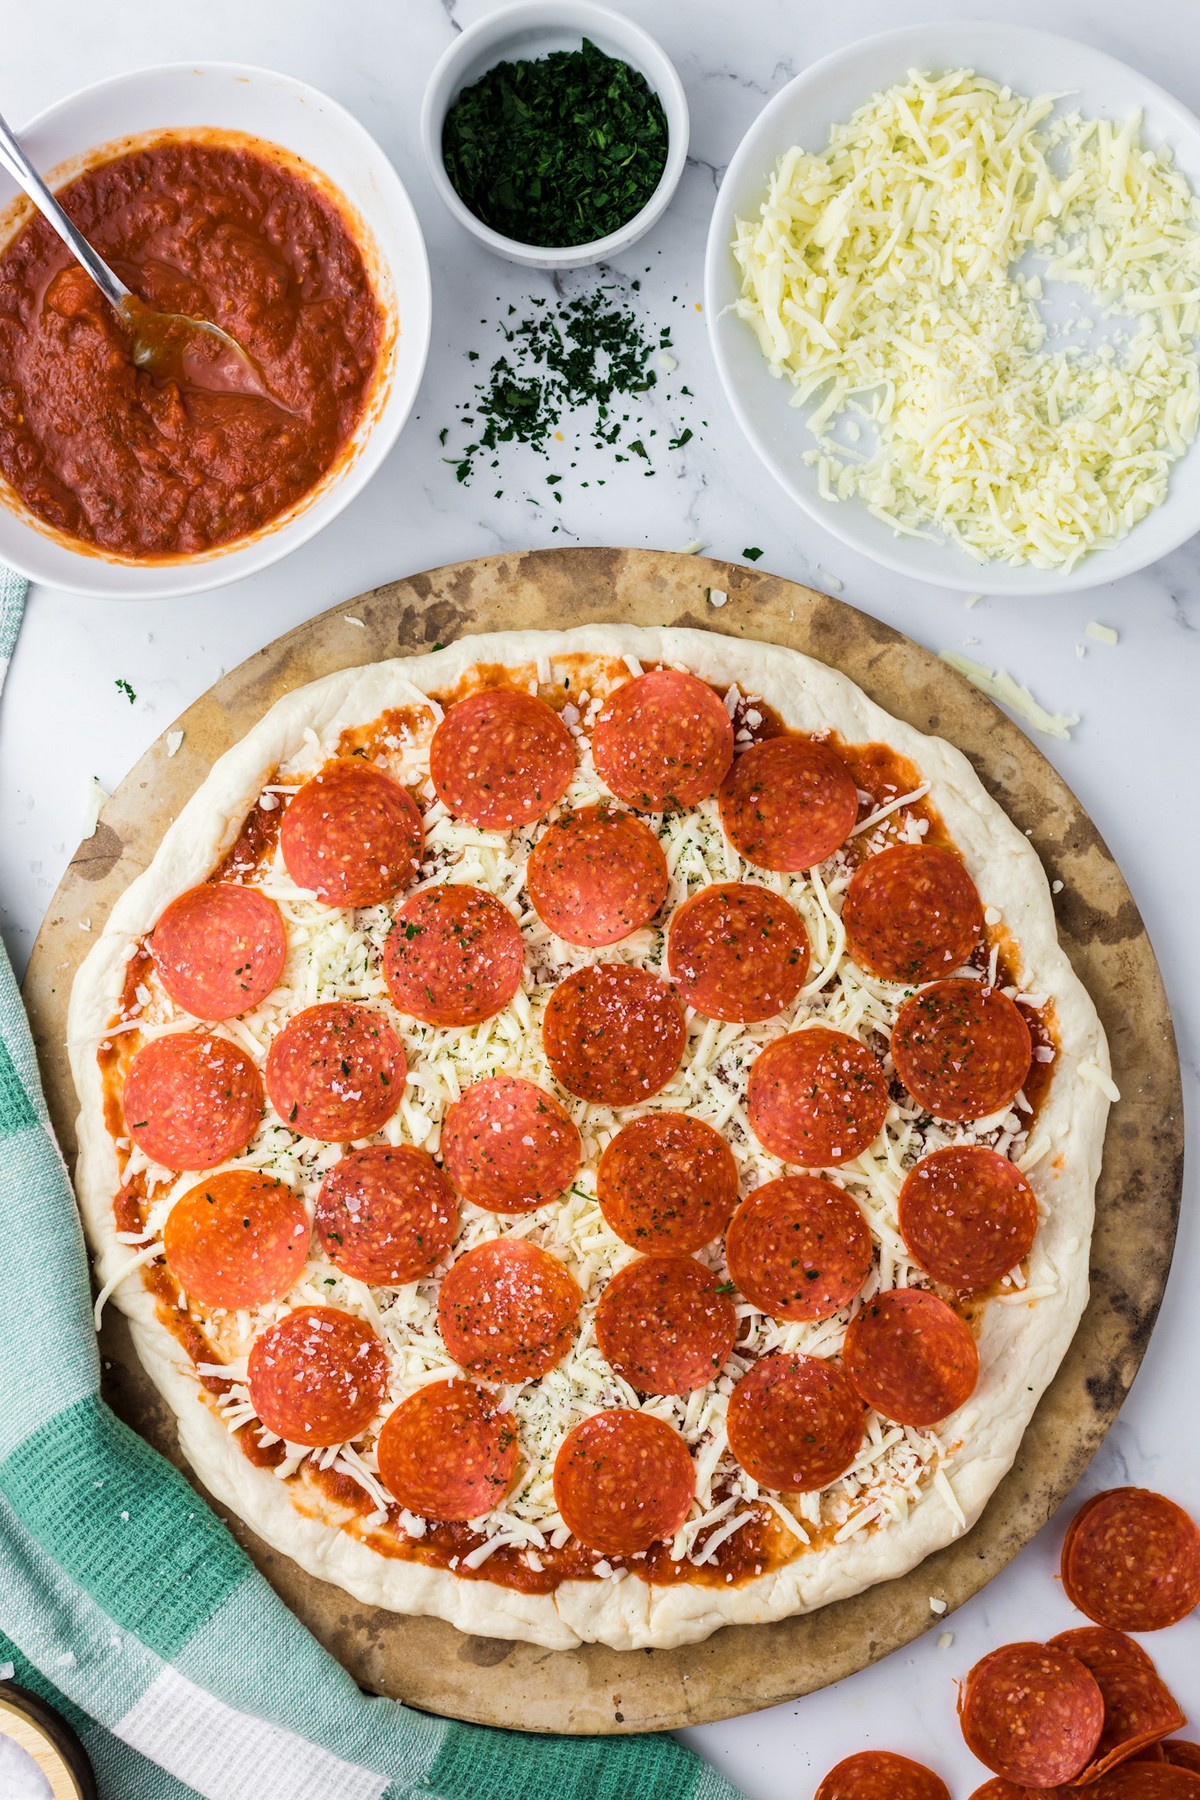 prepared unbaked pizza with ingredients